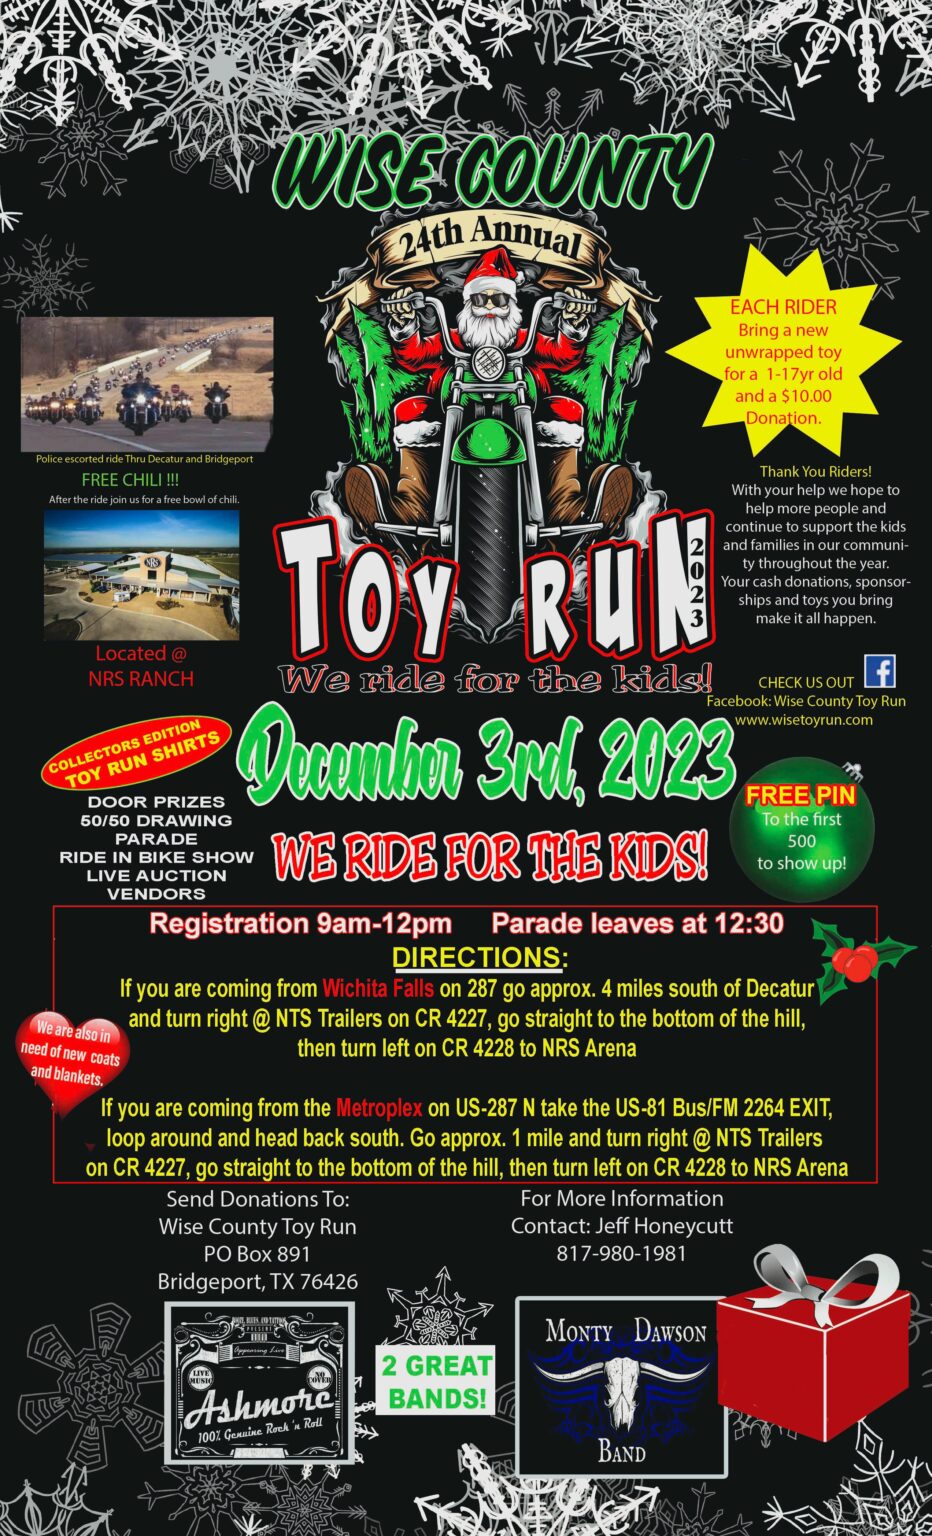 Wise County Toy Run Visit Decatur Texas